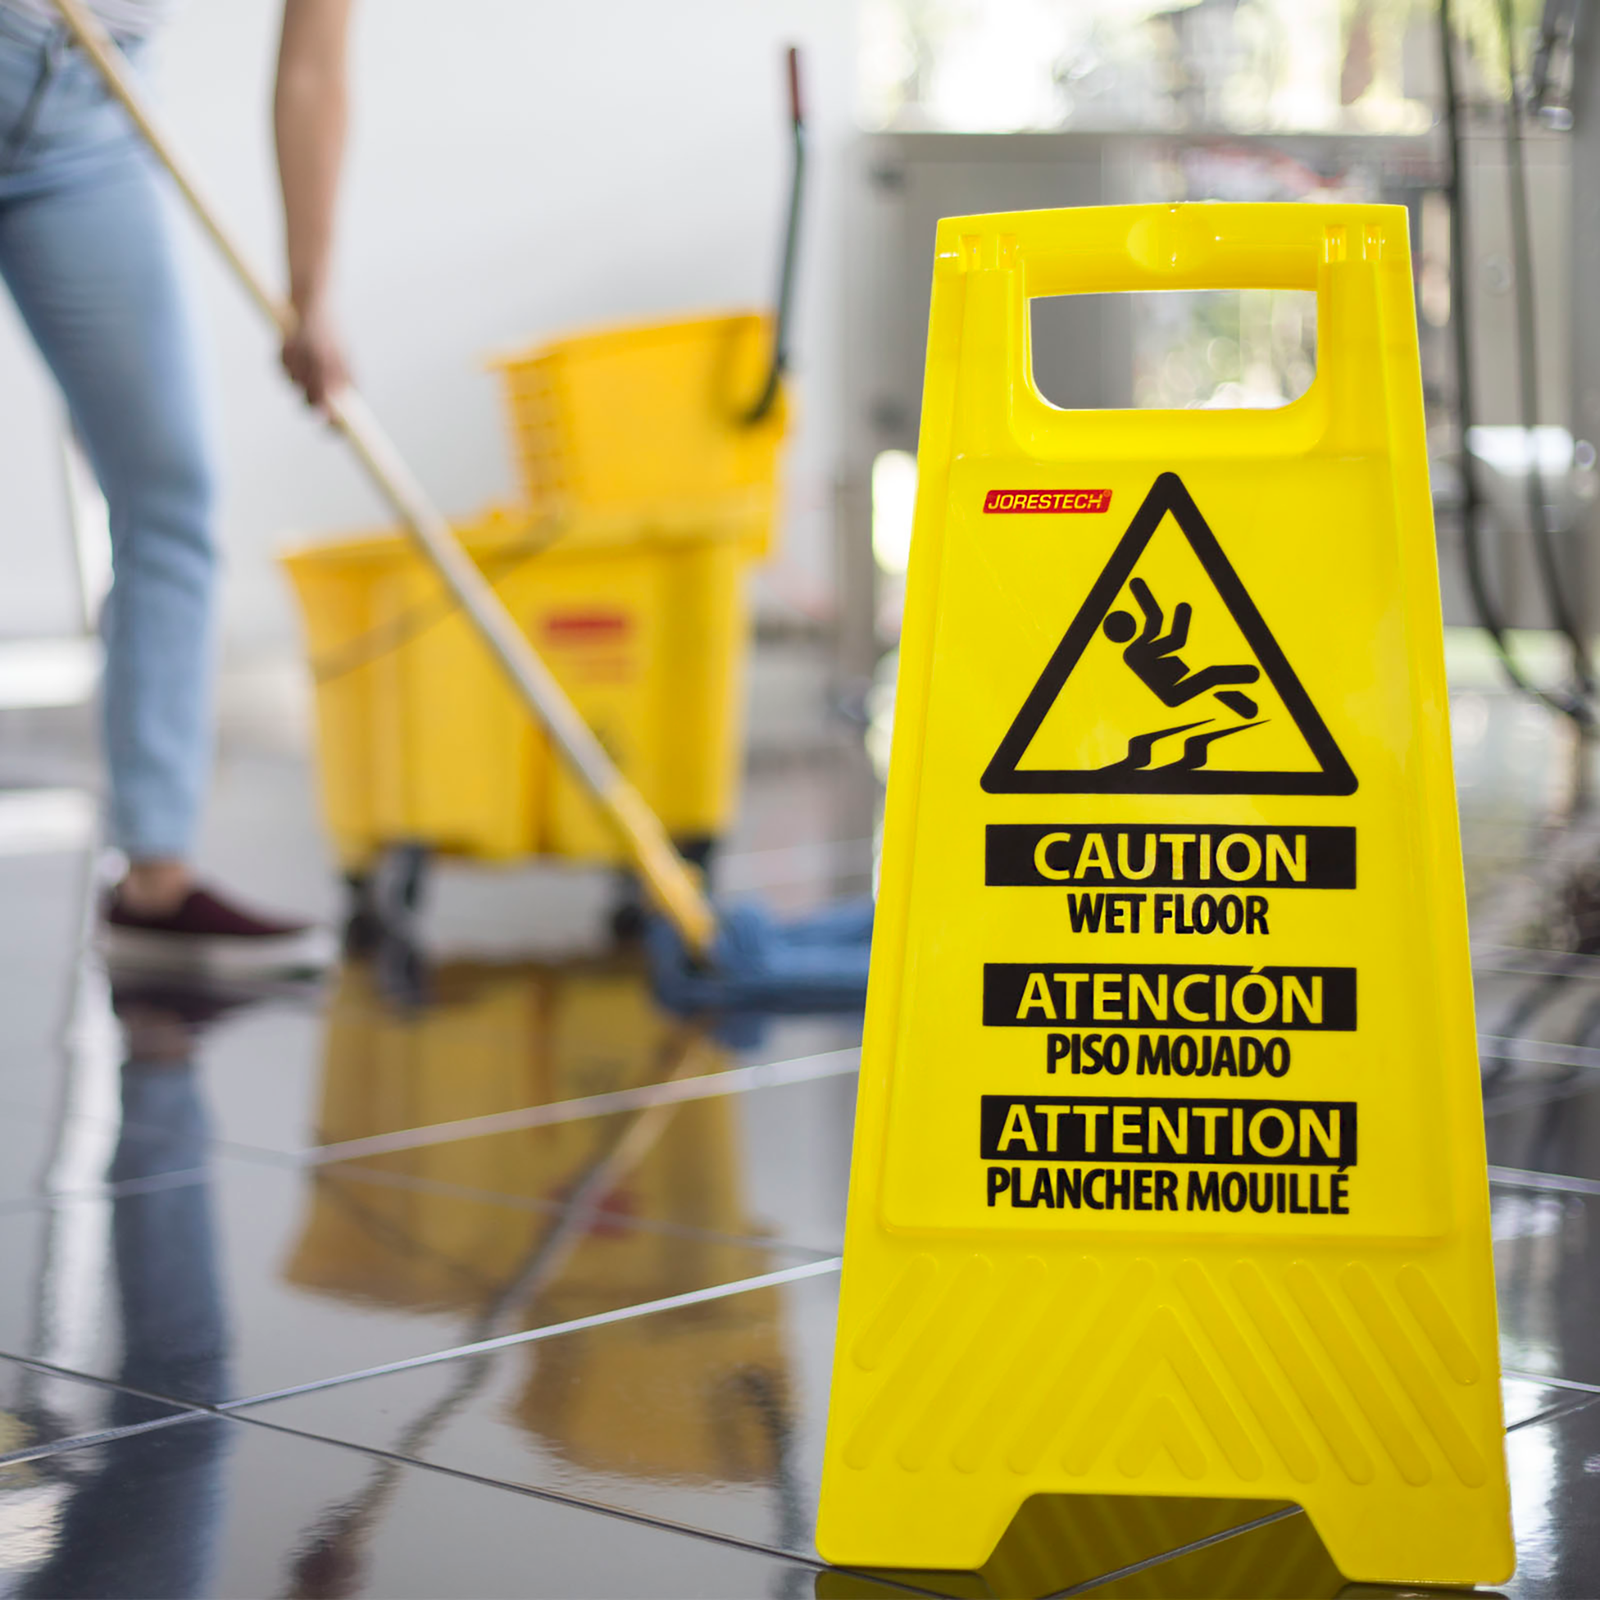 The Jorestech two sided folding wet floor caution stand used while a person is mopping the floor.